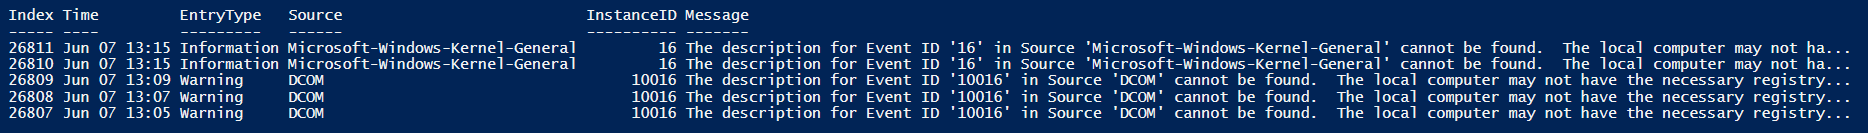 display system event log in tabular format with format-table